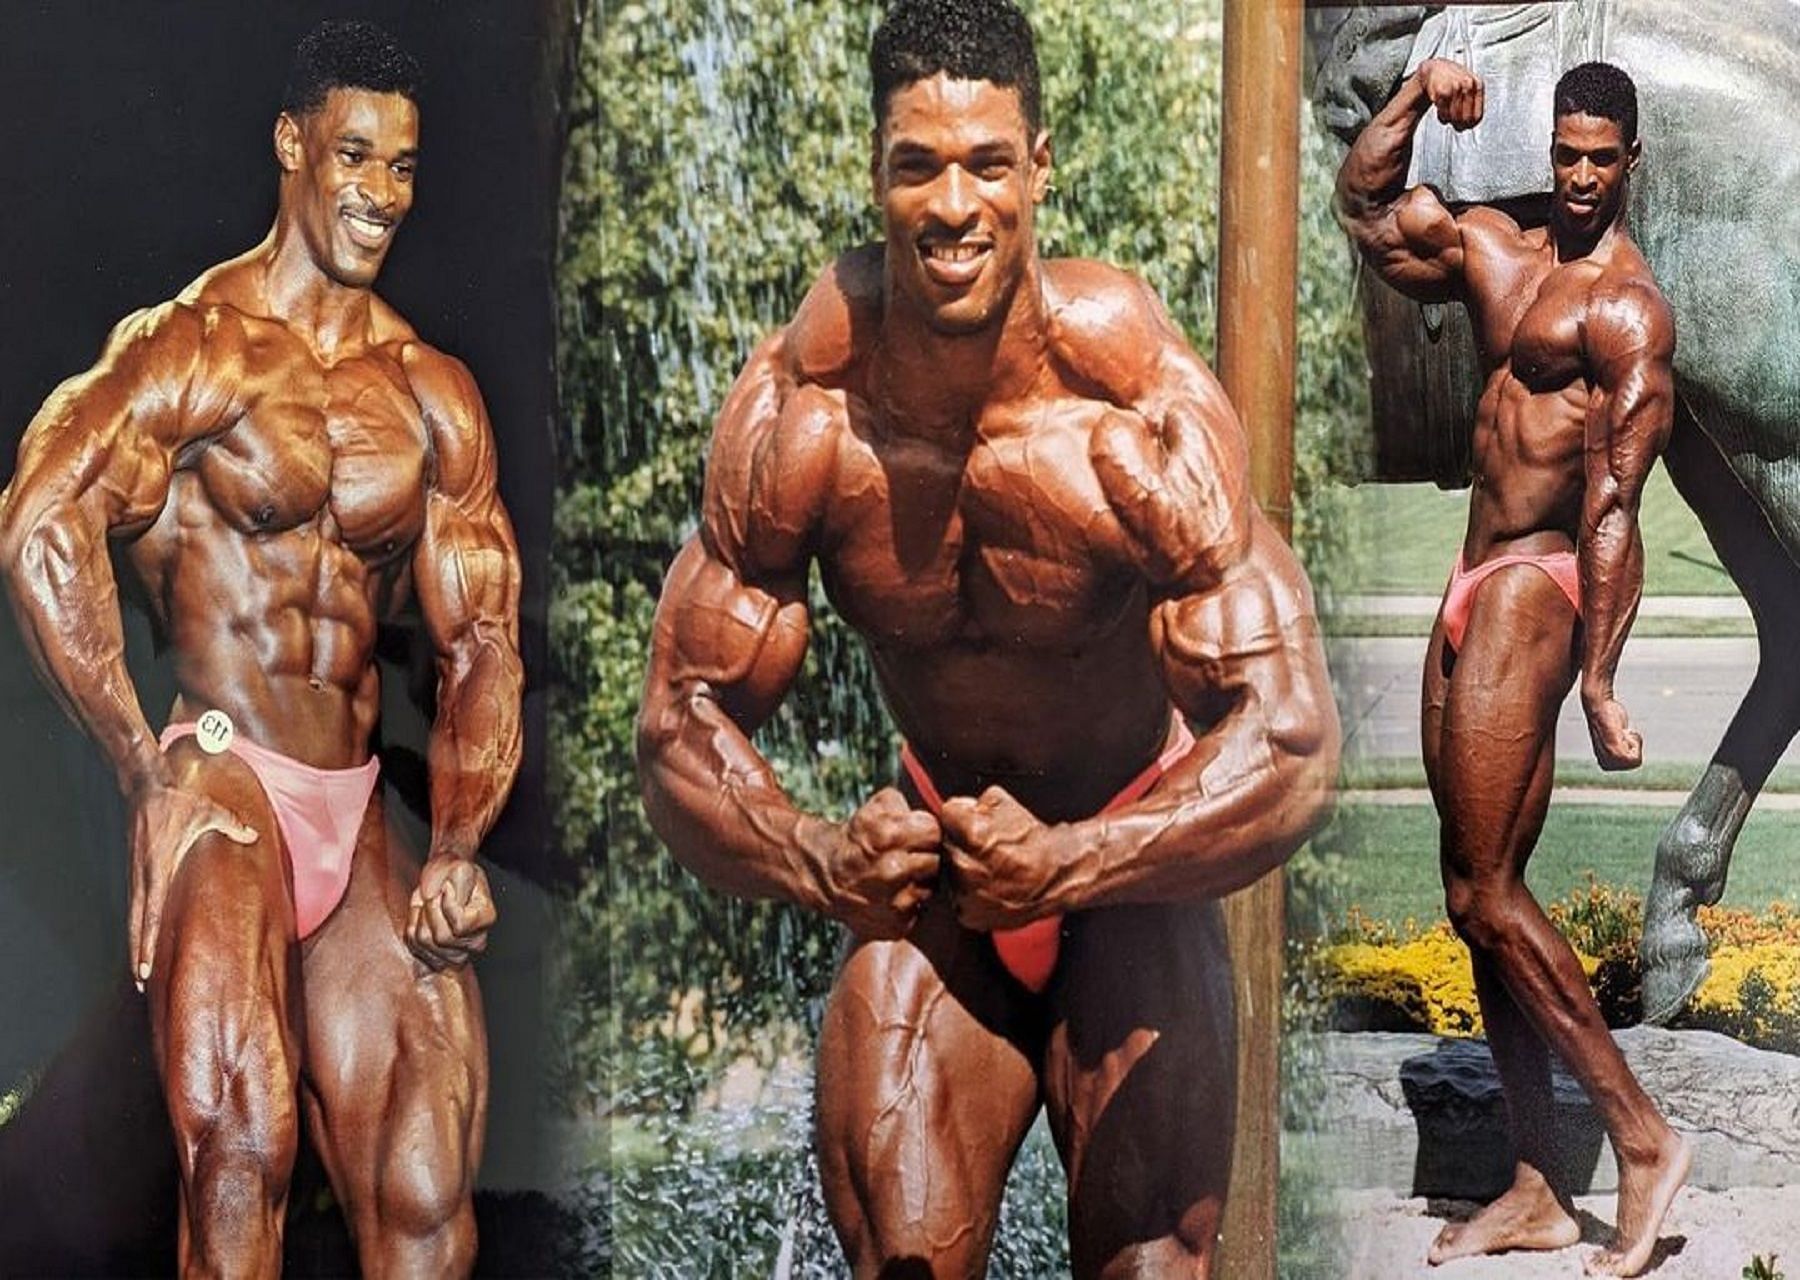 What was the drive behind Ronnie Coleman's consistency, hardworking, and  patience? - Quora